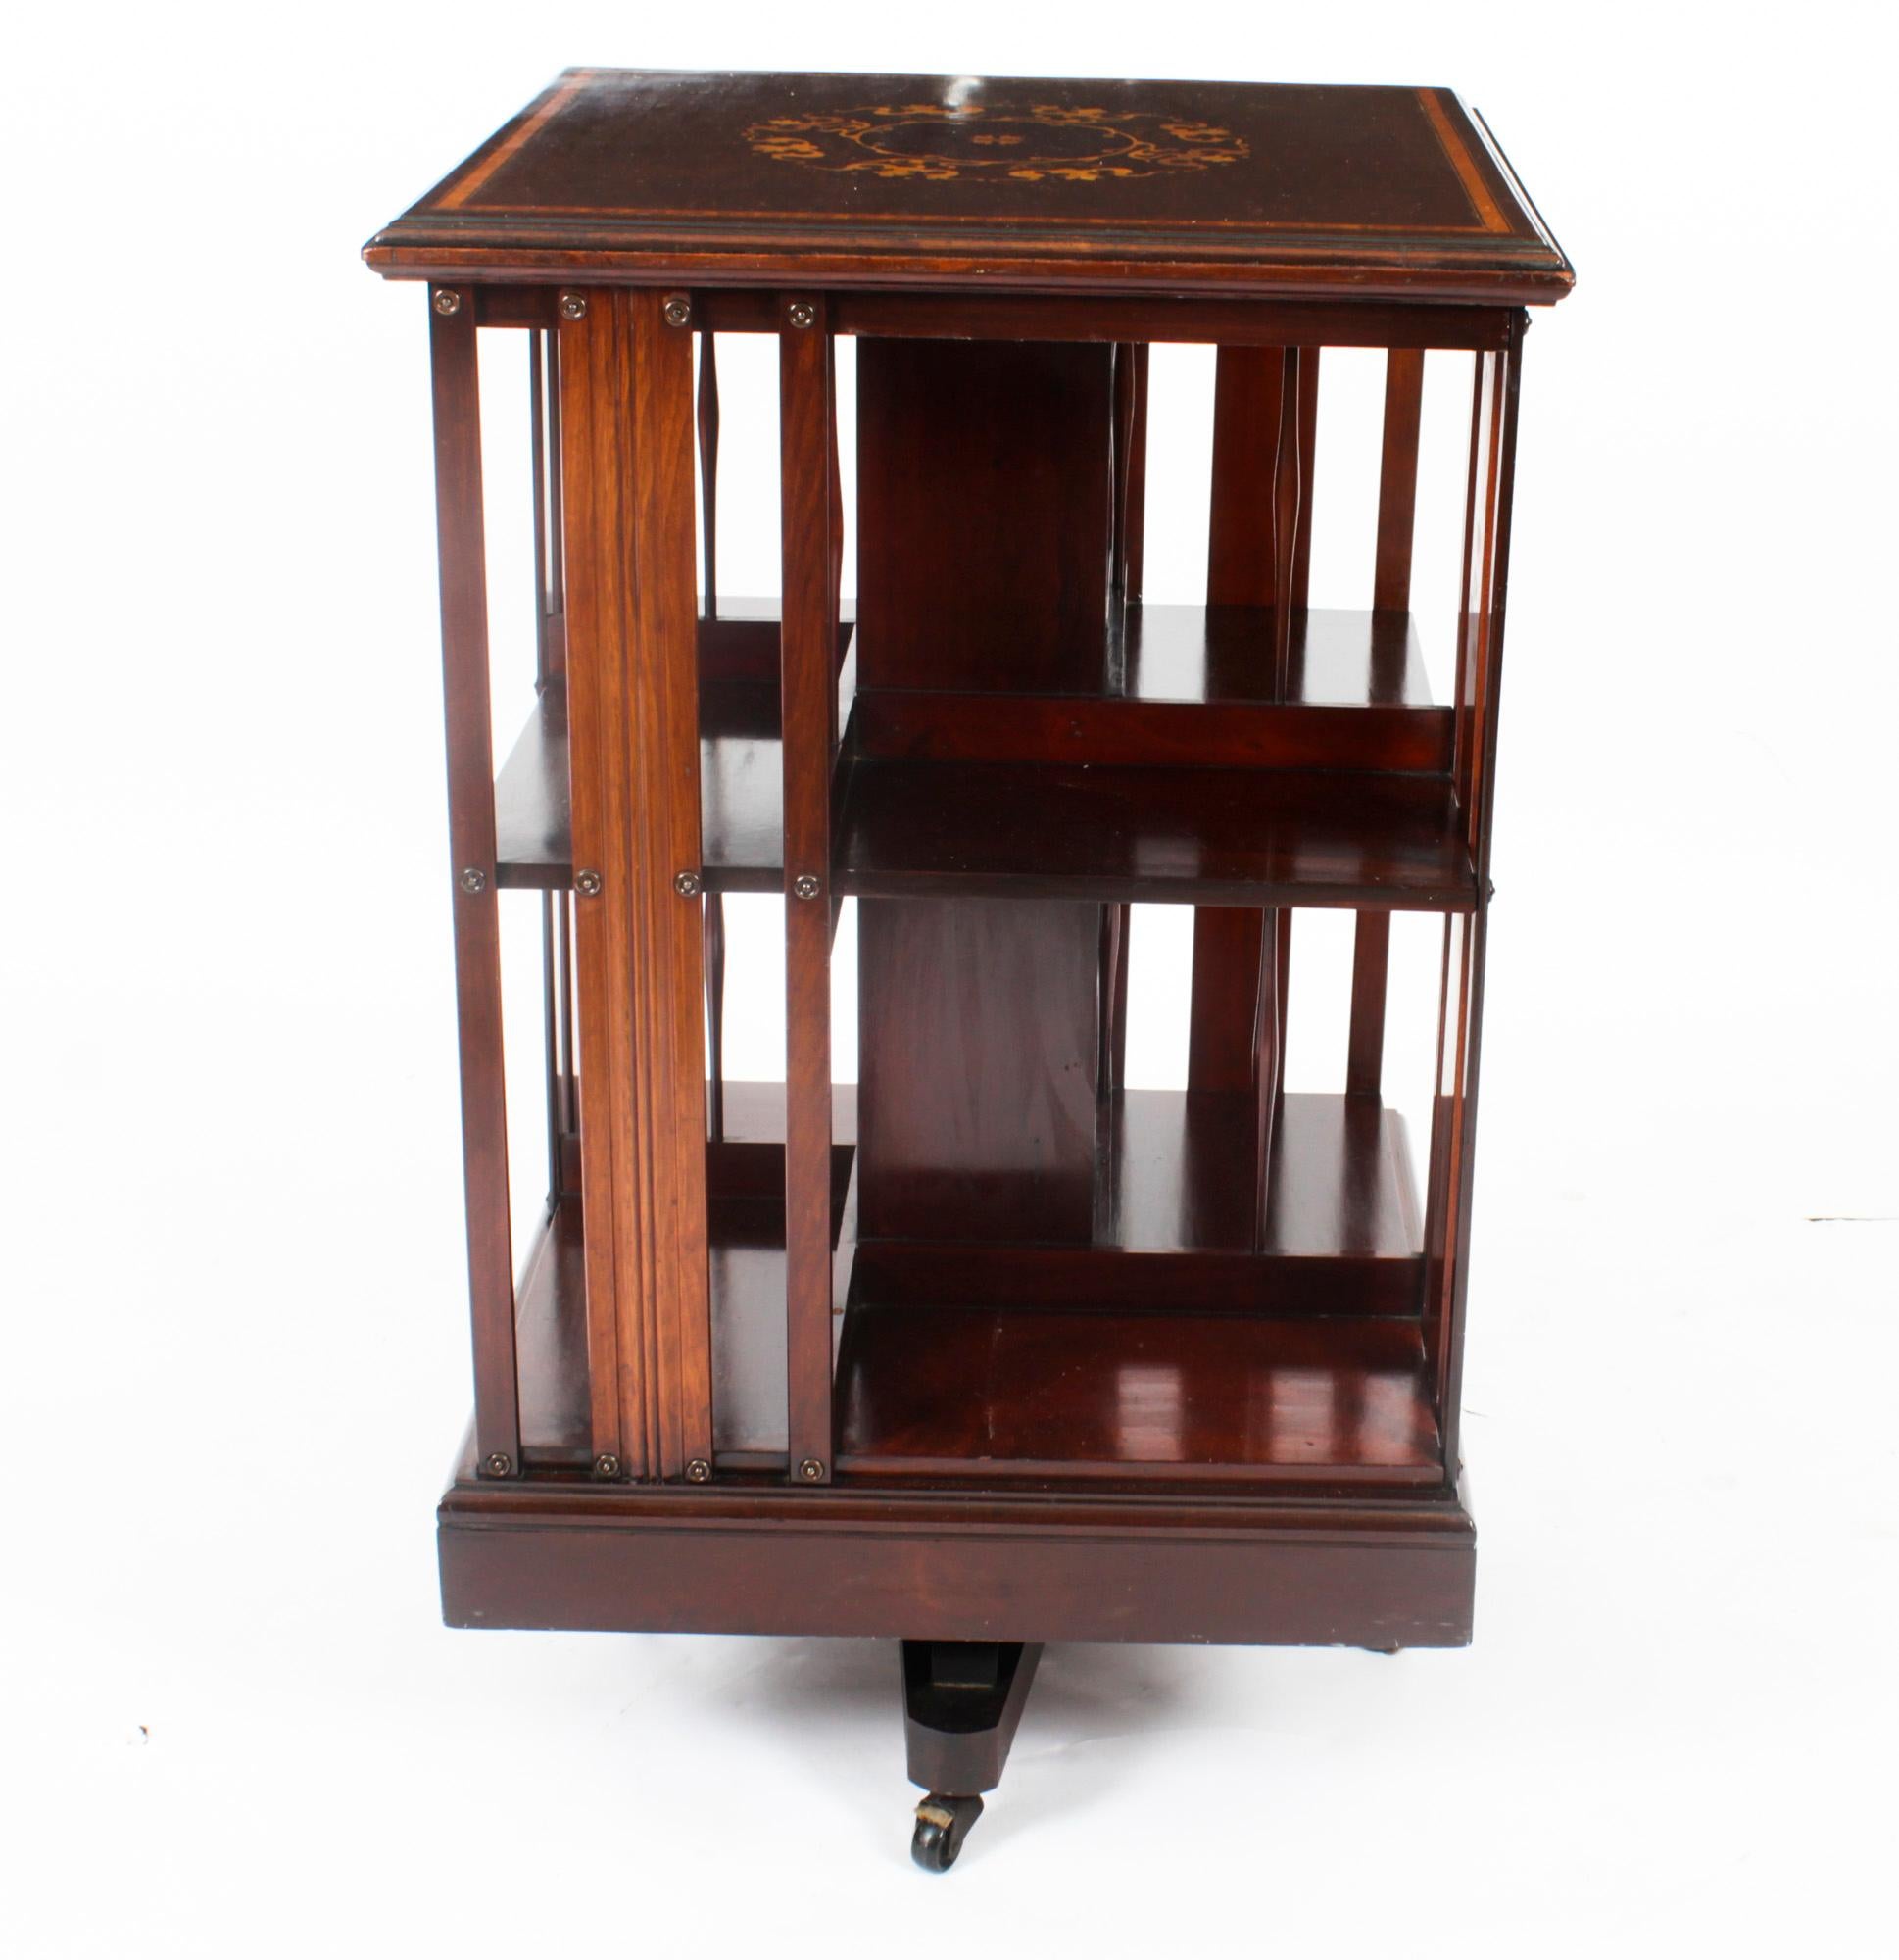 English Antique Victorian Marquetry Inlaid Revolving Bookcase 19th C